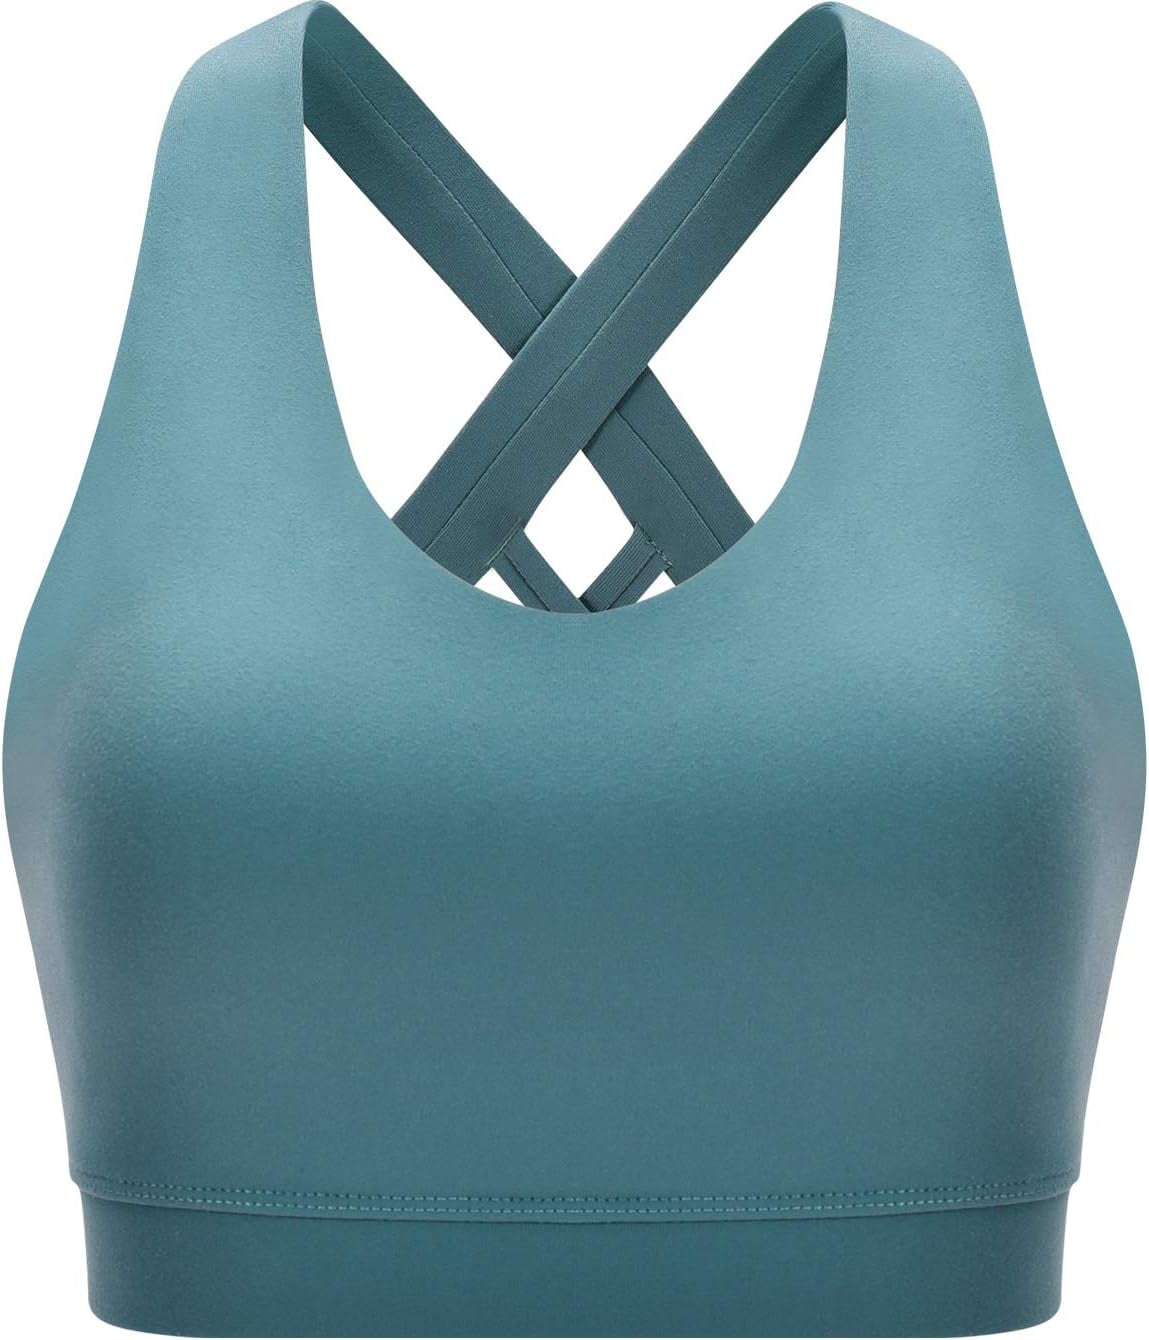 All In Motion High Support Seamless Sports Bra Turquoise Blue size medium -  $14 New With Tags - From Katie